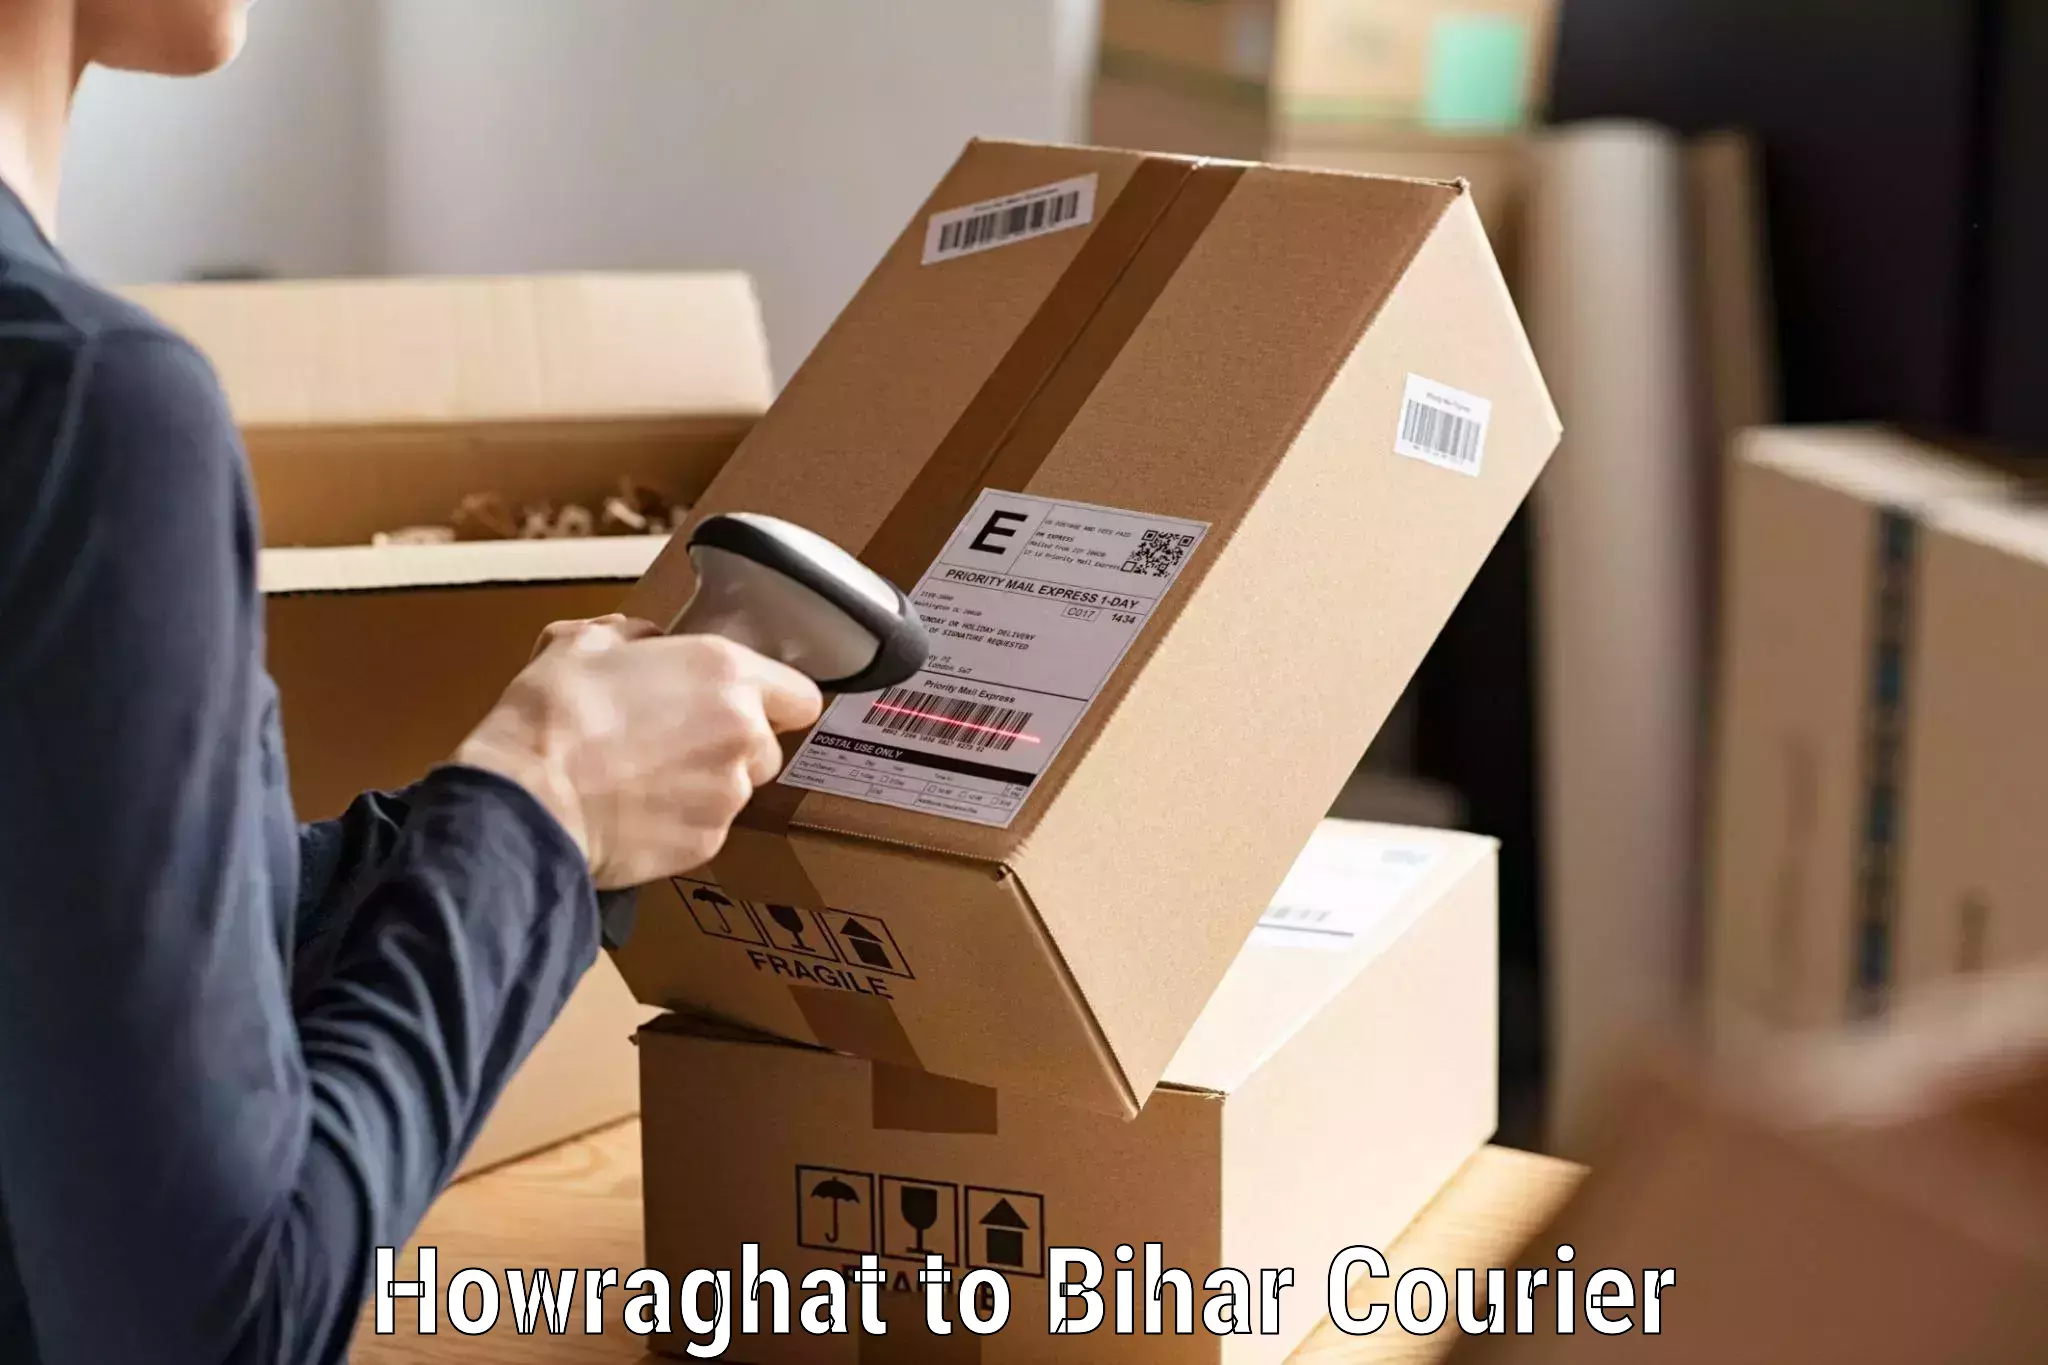 Express delivery capabilities Howraghat to Dighwara